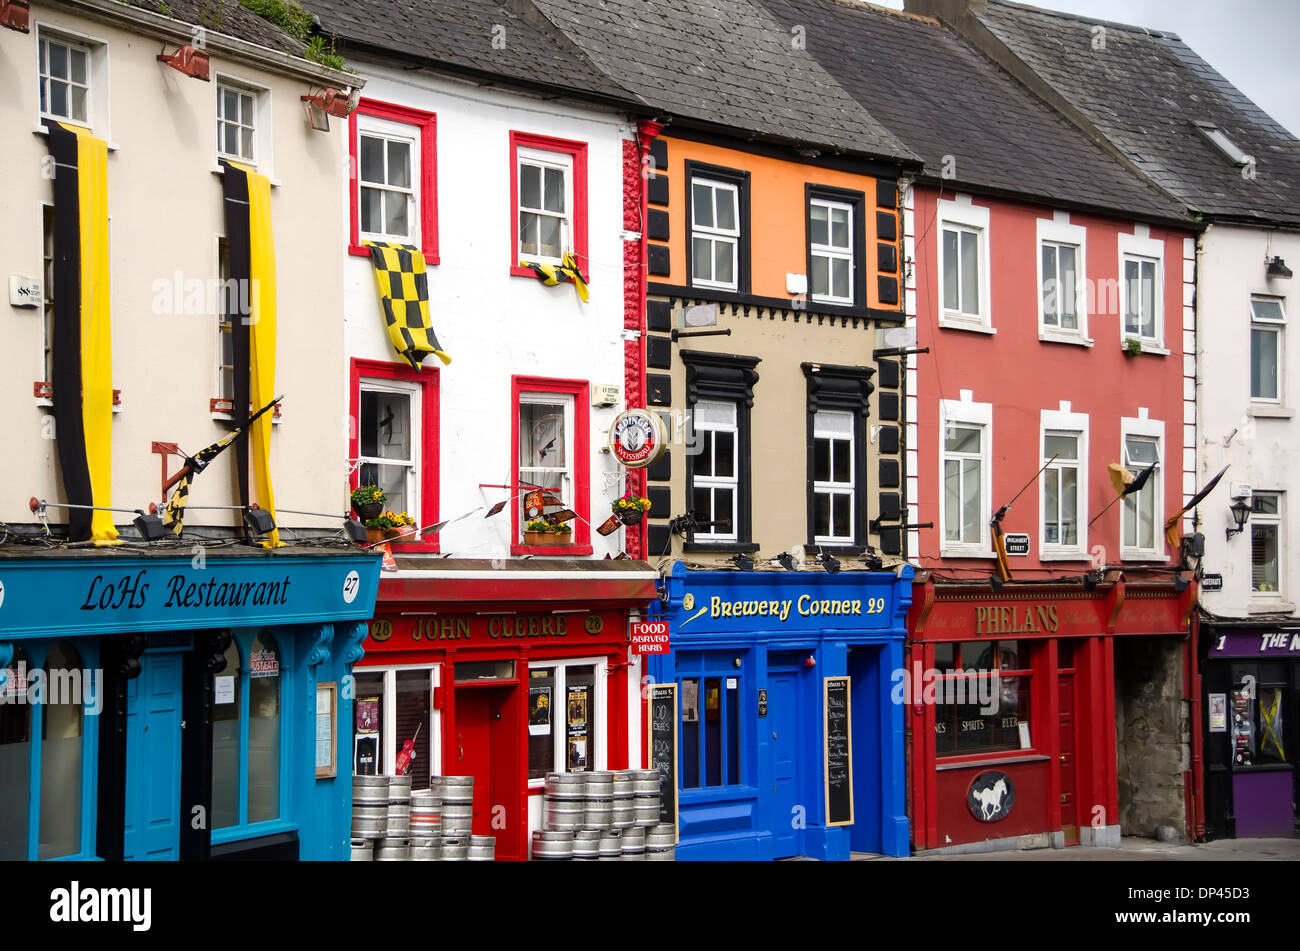 Streetscape colorful architecture buildings Parliament Street, Kilkenny City town, Ireland Stock Photo